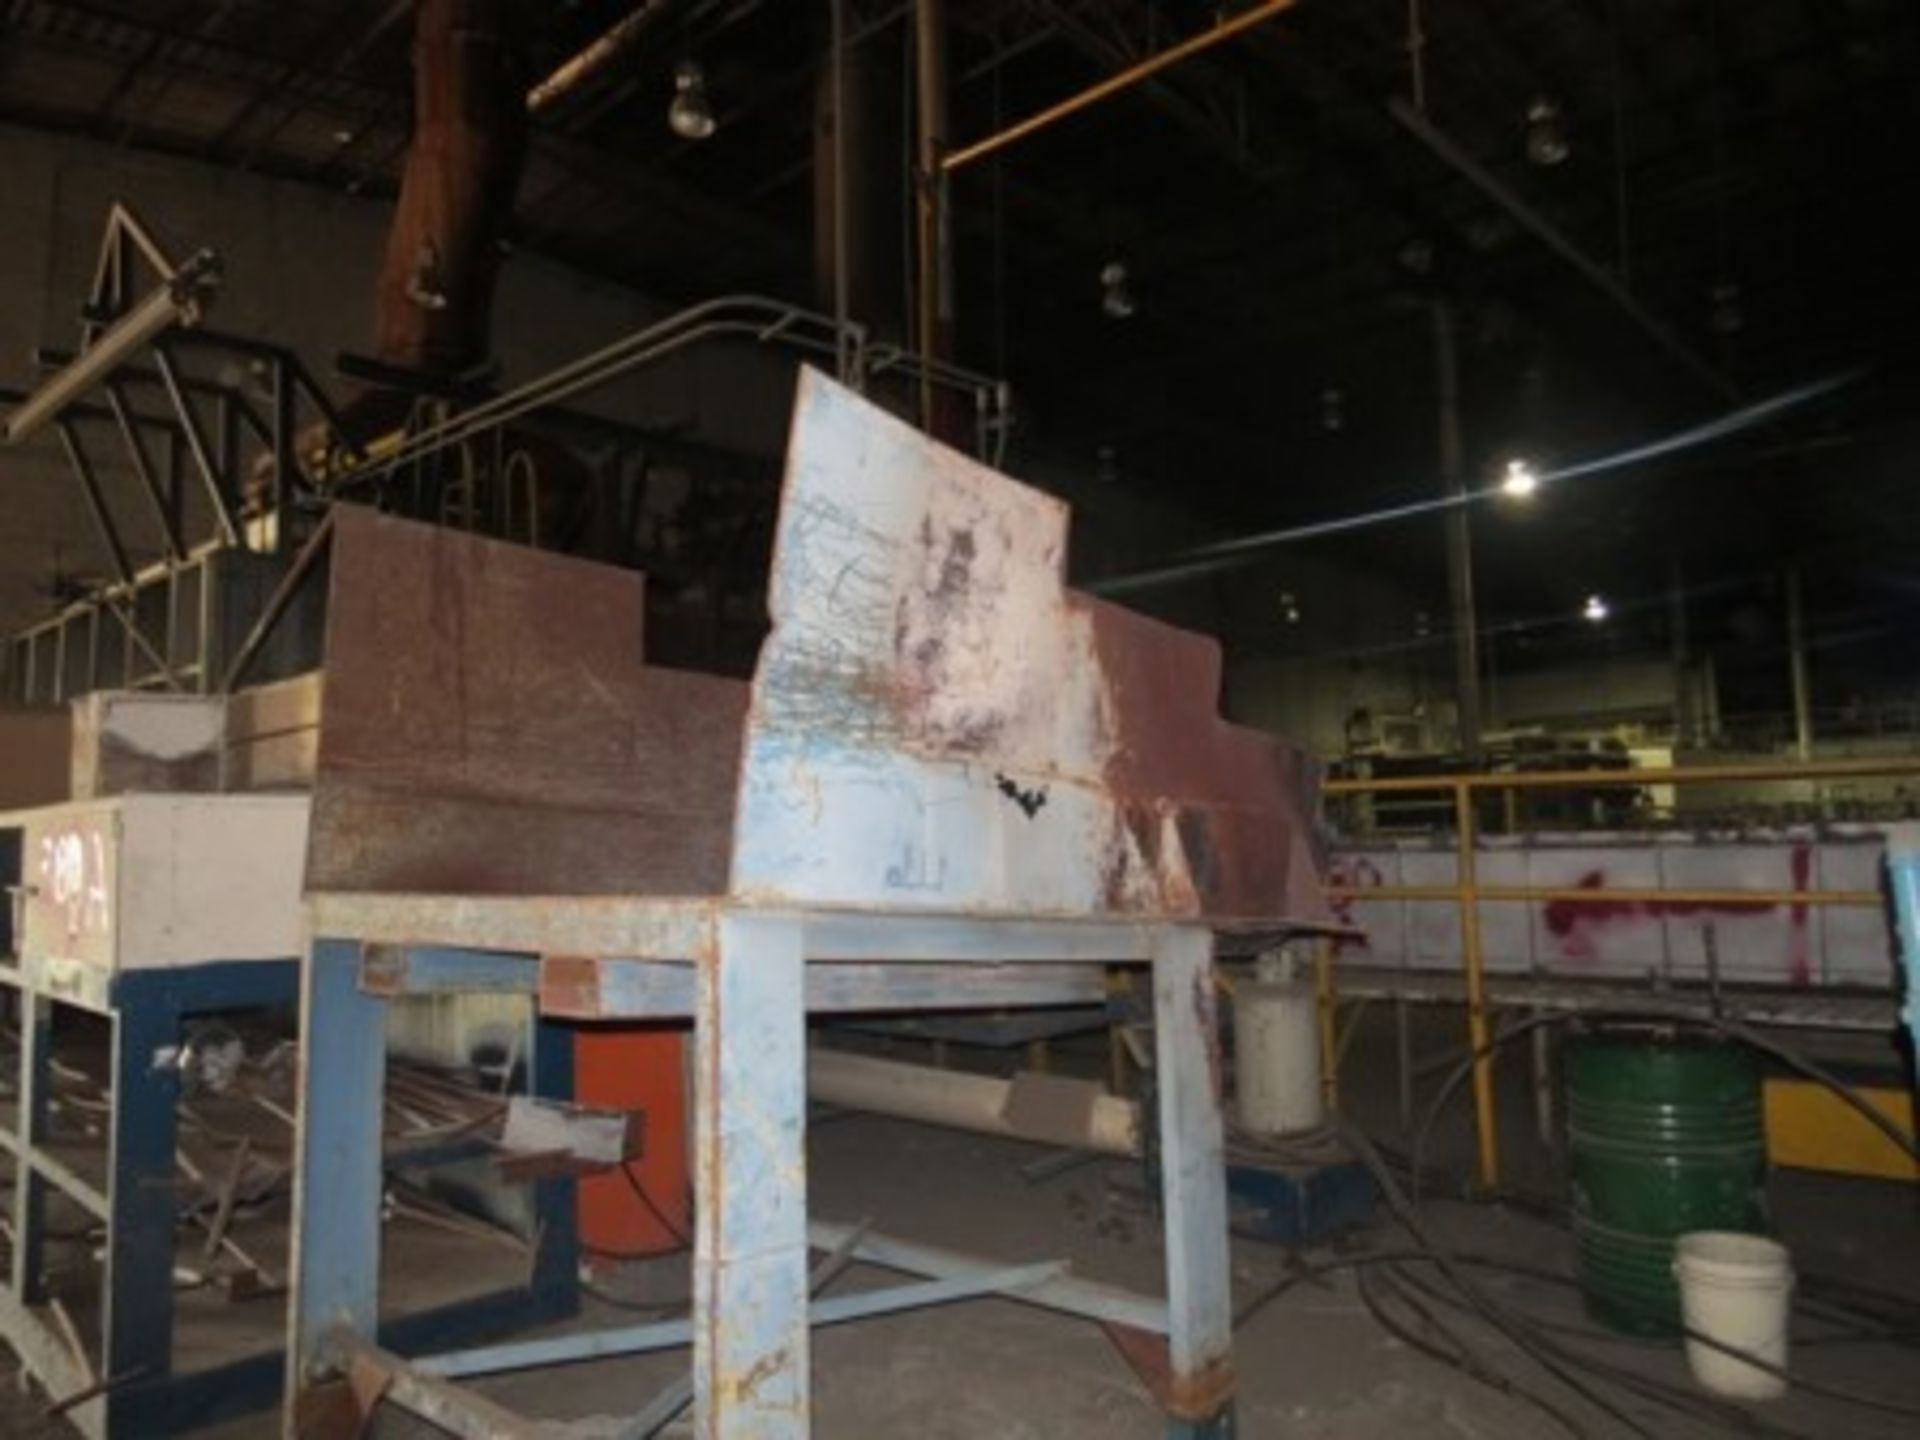 Melting furnace with dumper, hood and ductwork for gas extraction. - Image 5 of 28